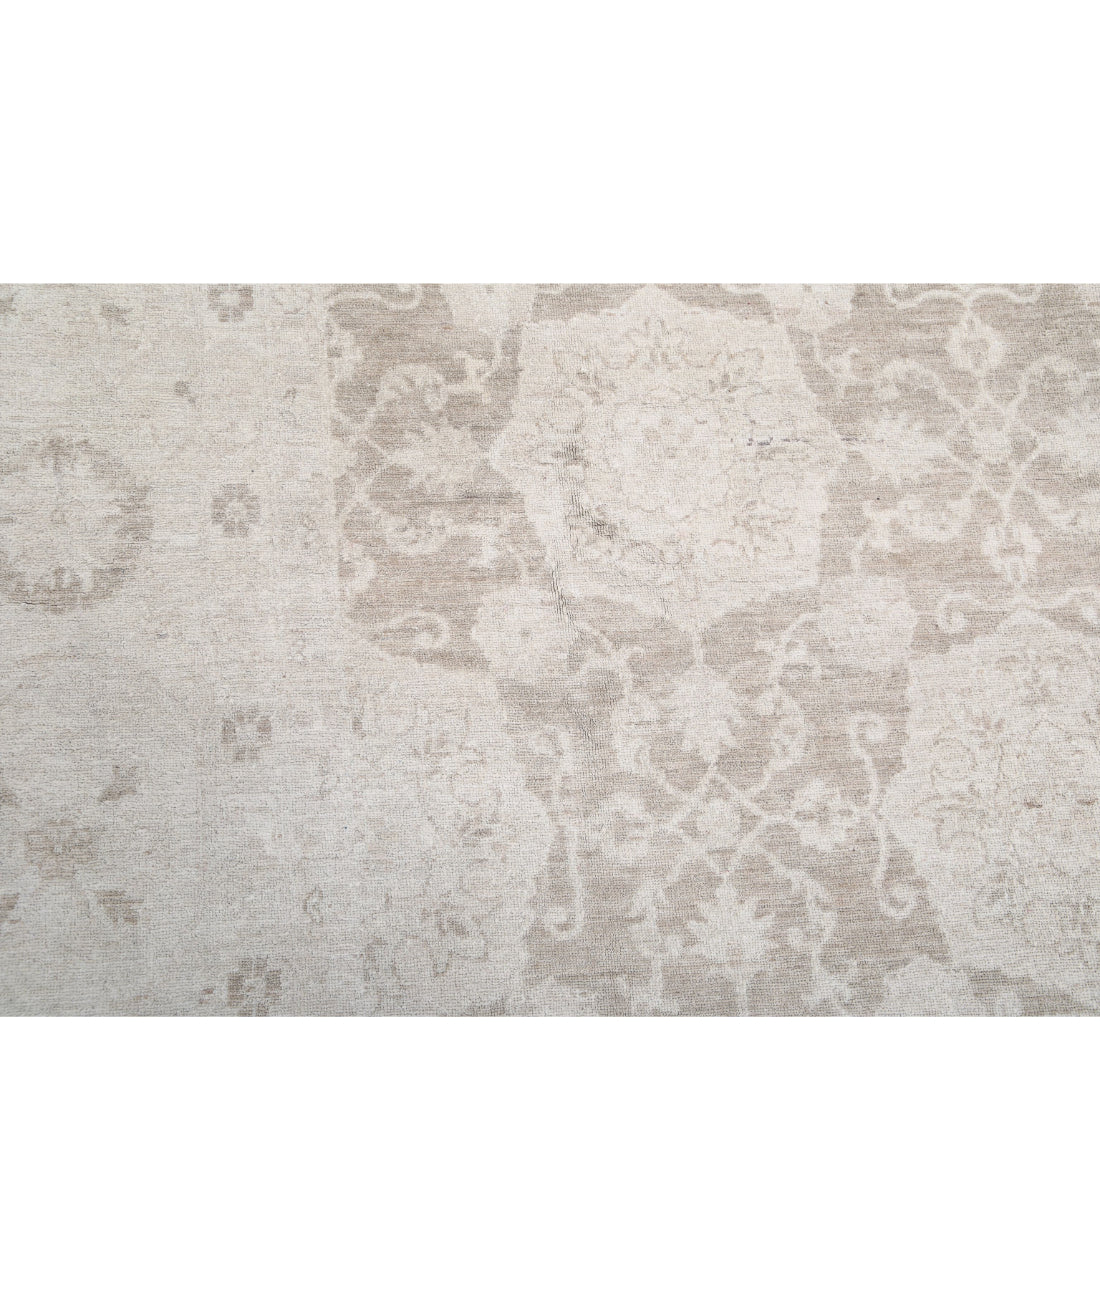 Hand Knotted Serenity Wool Rug - 10'10'' x 18'5'' 10'10'' x 18'5'' (325 X 553) / Taupe / Ivory